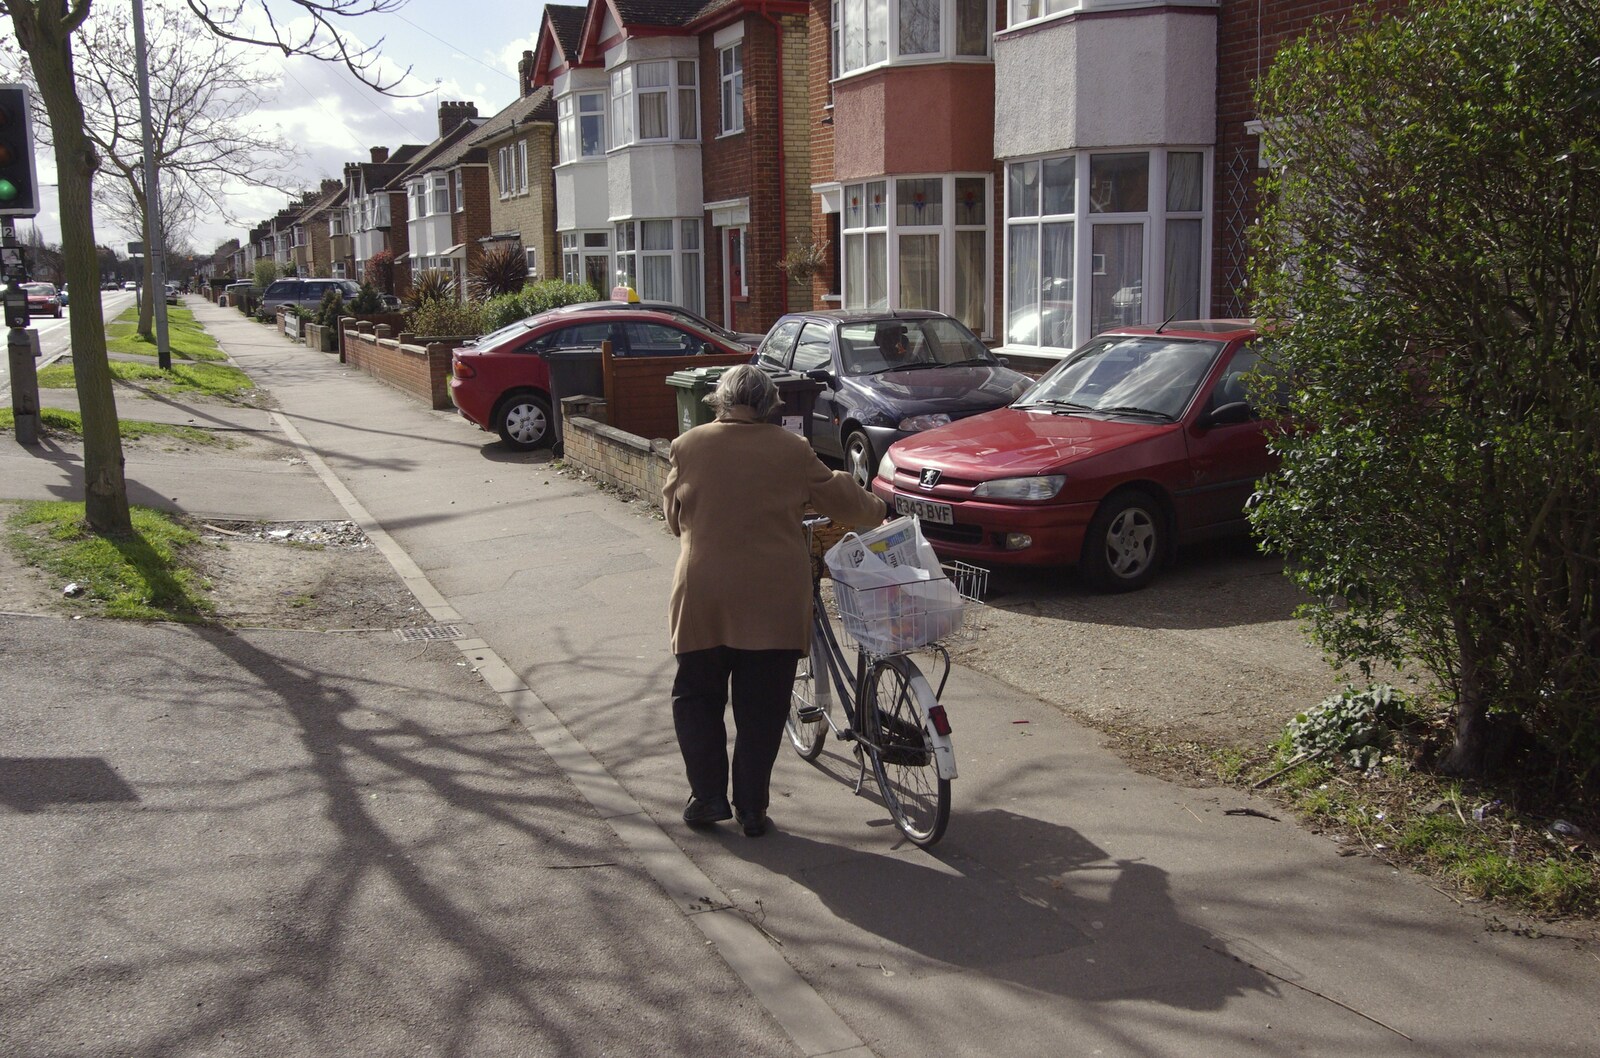 An old woman pushes a bike up Perne Road from The Derelict Salam Newsagents, Perne Road, Cambridge - 18th March 2007